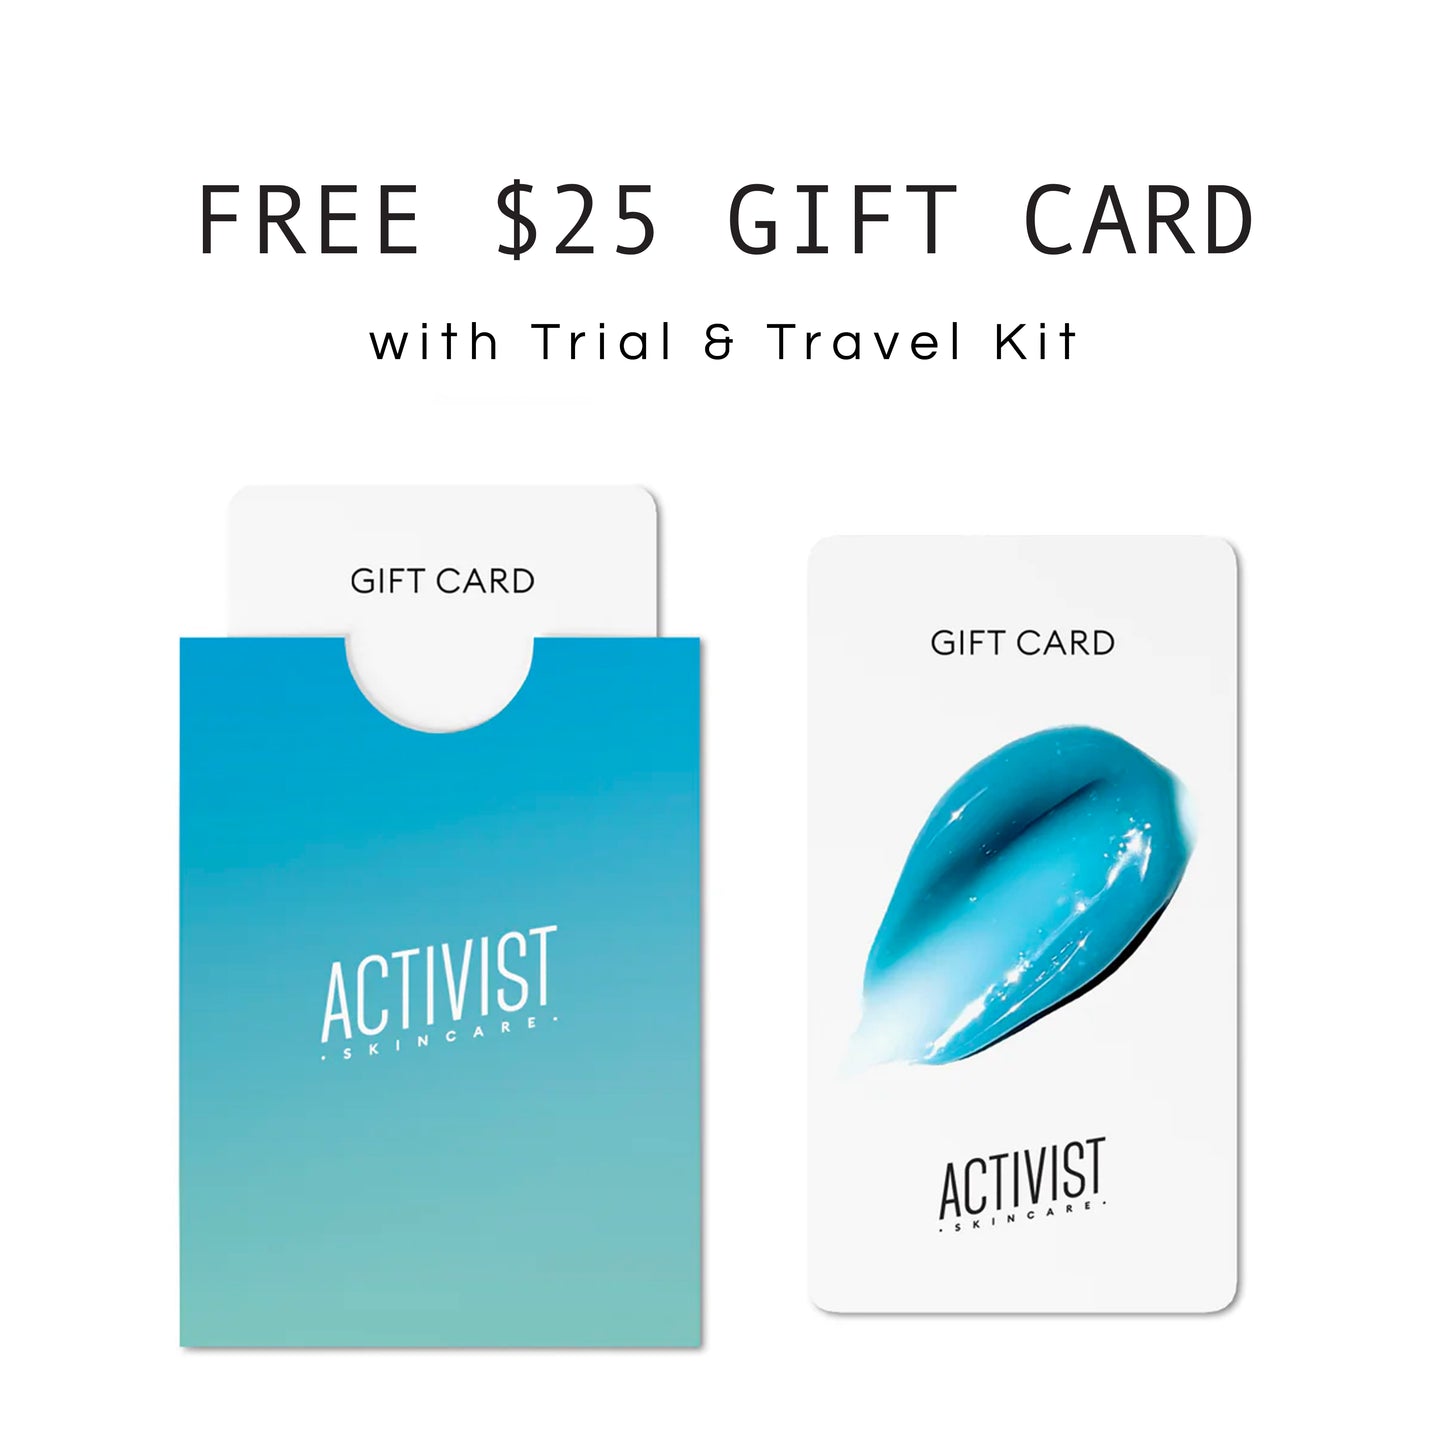 FREE $25 GIFT CARD with Trial & Travel Kit